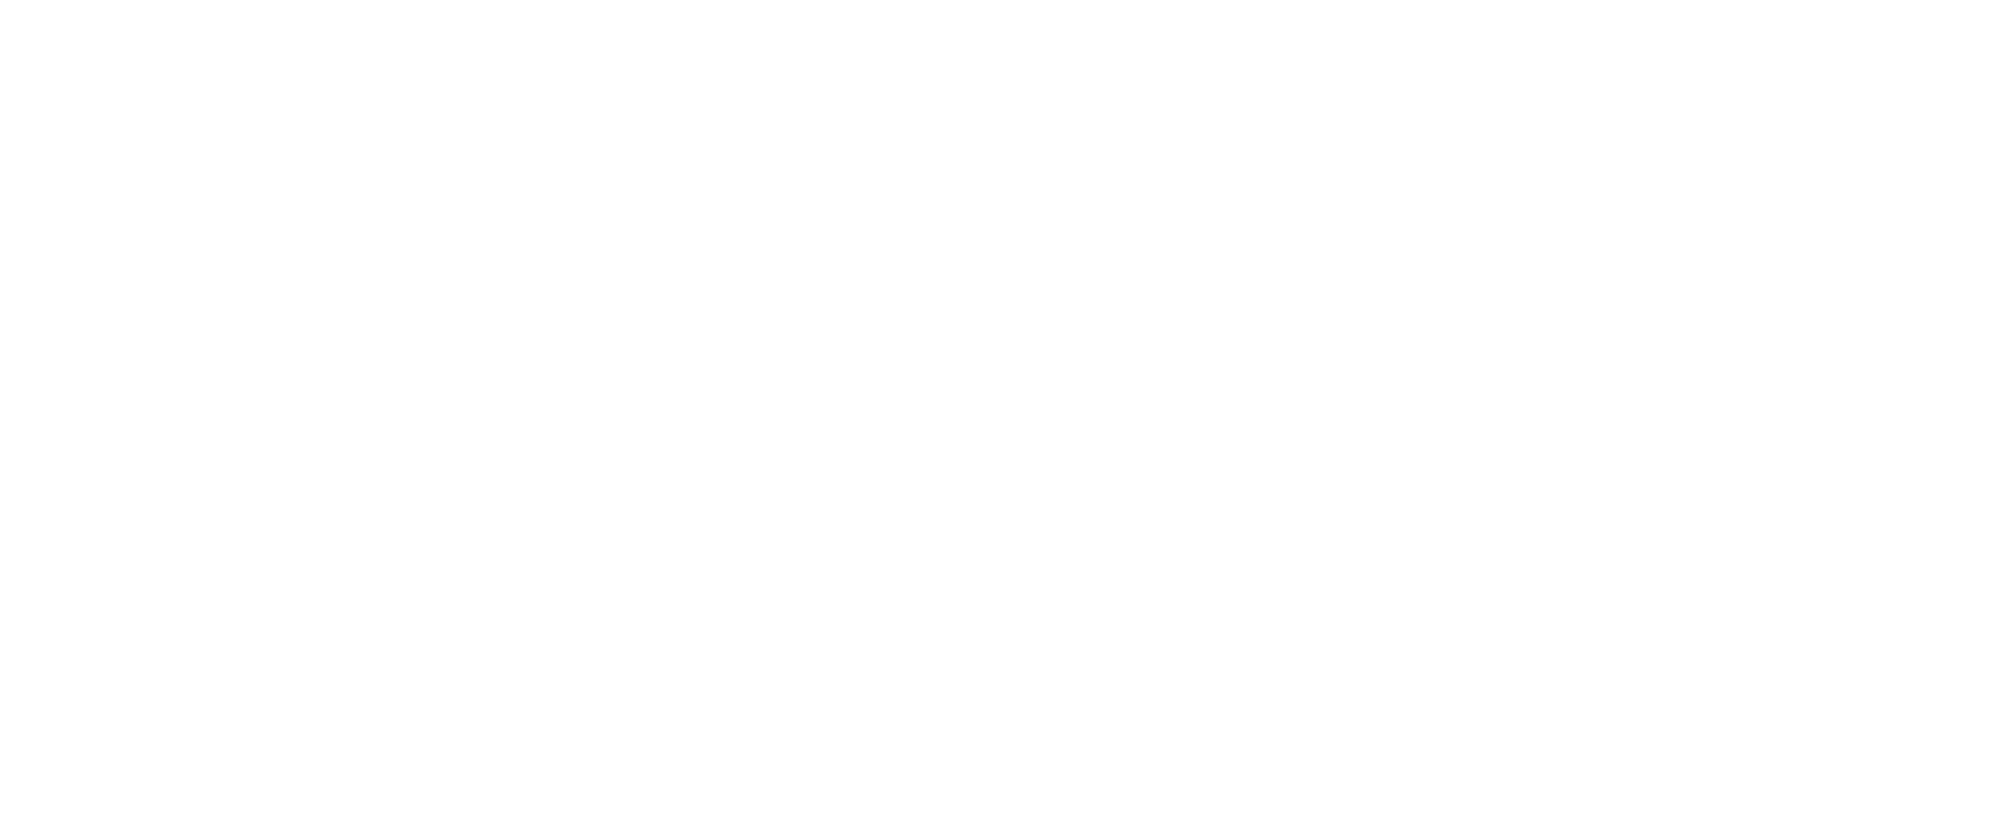 Moved to Action logo